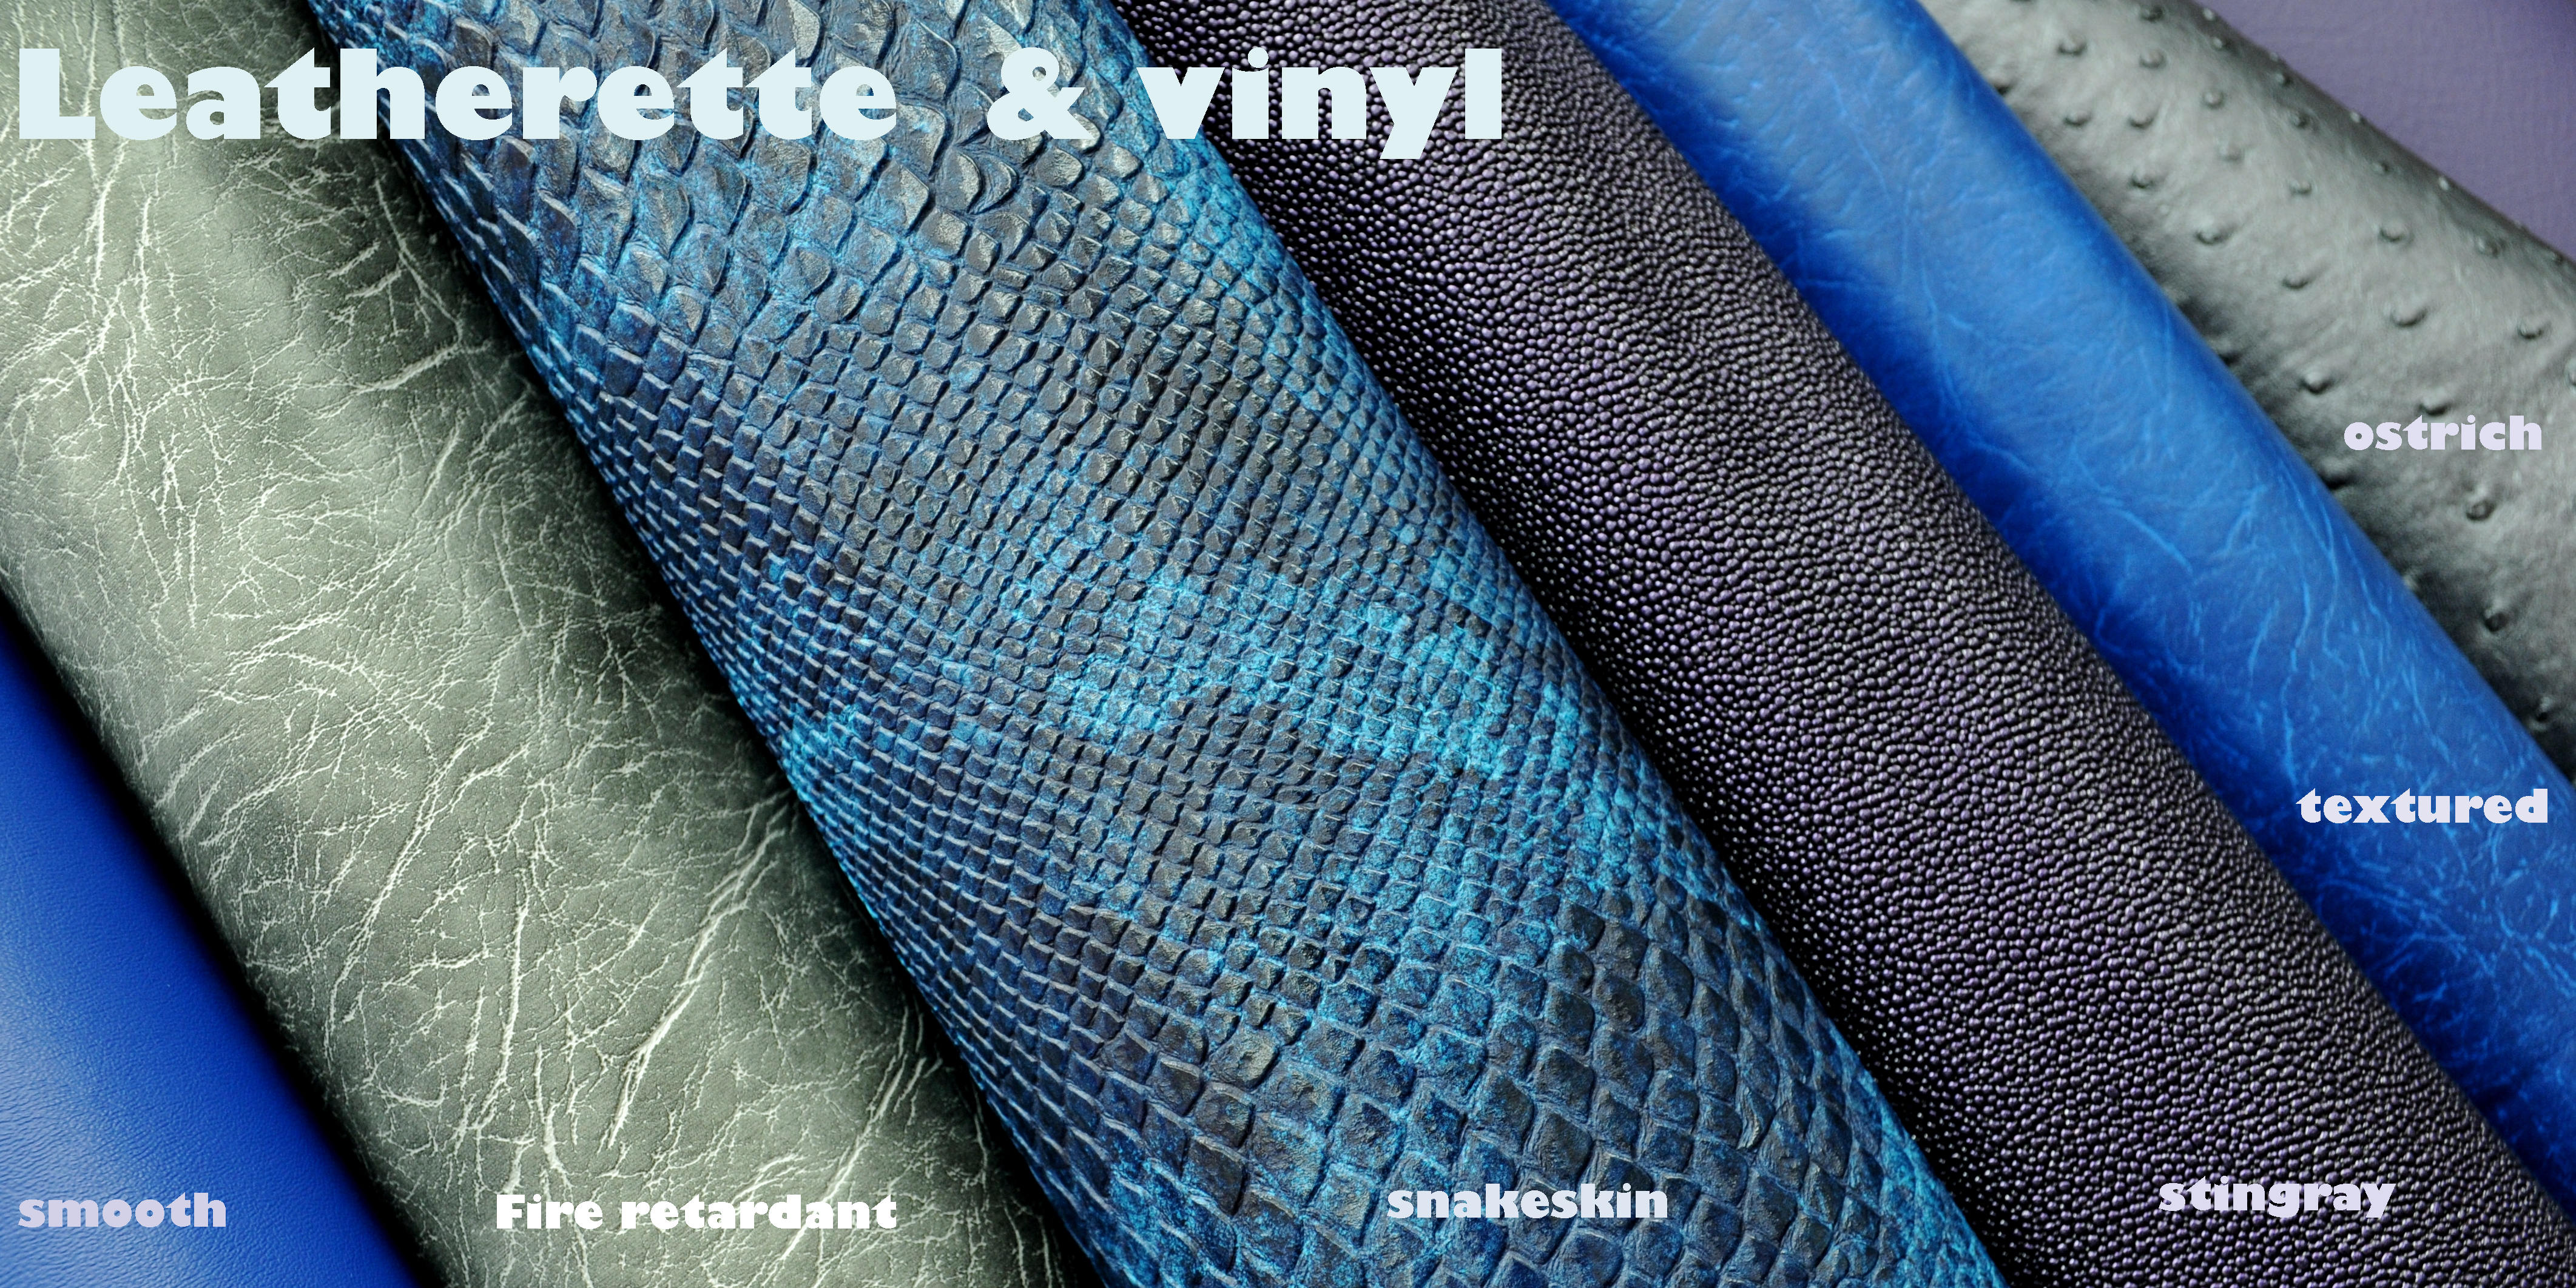 Vinyl and Leatherette Fabric Collections.